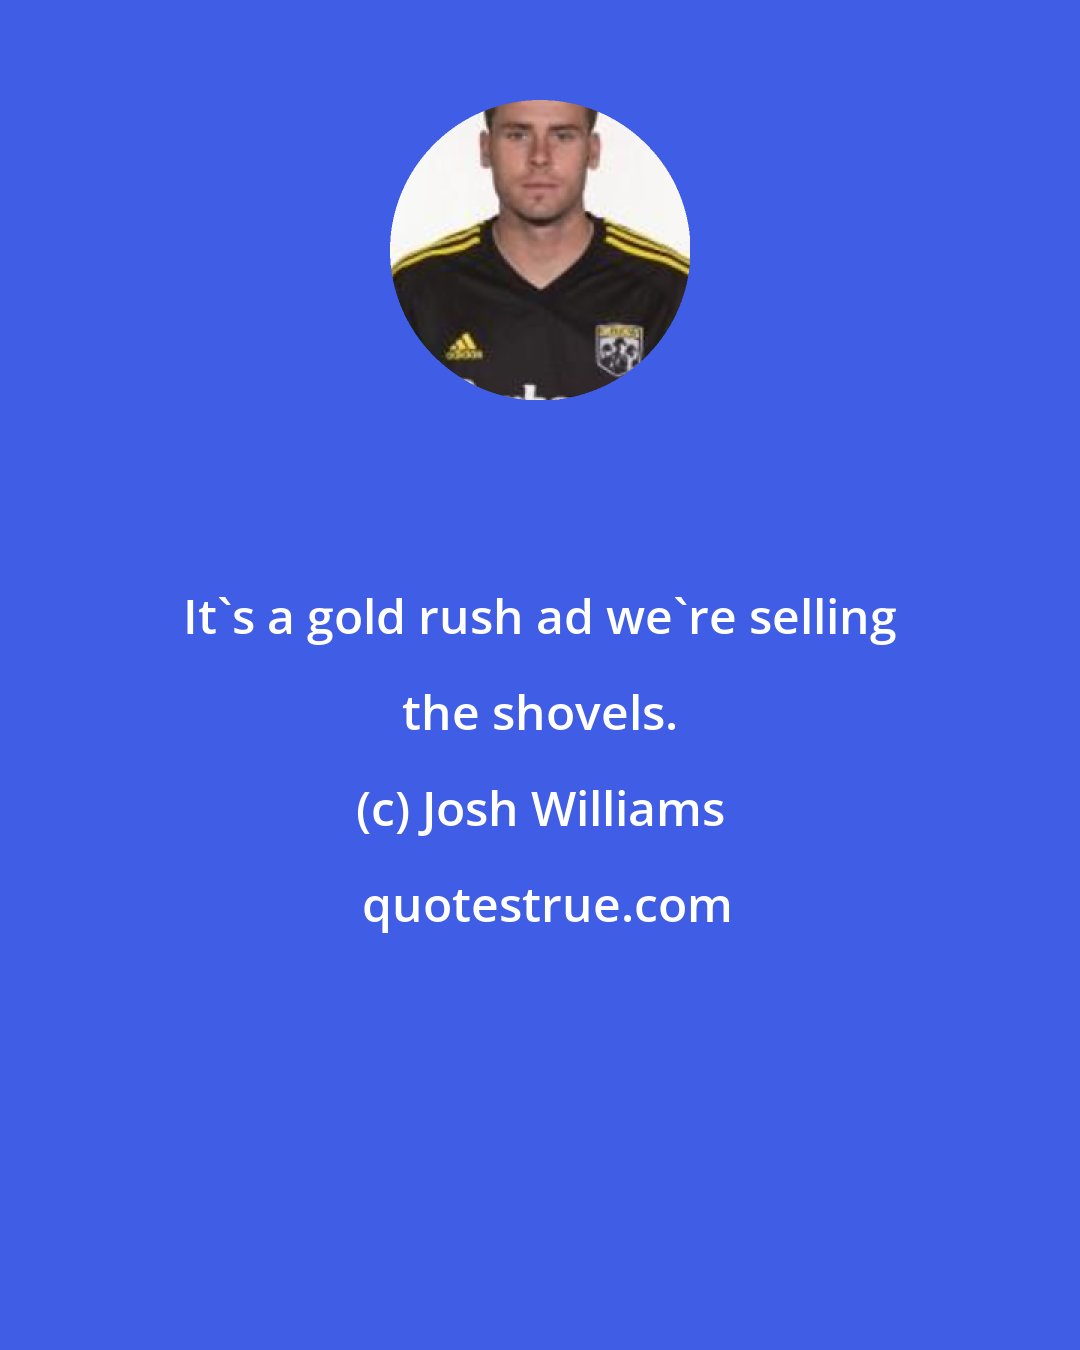 Josh Williams: It's a gold rush ad we're selling the shovels.